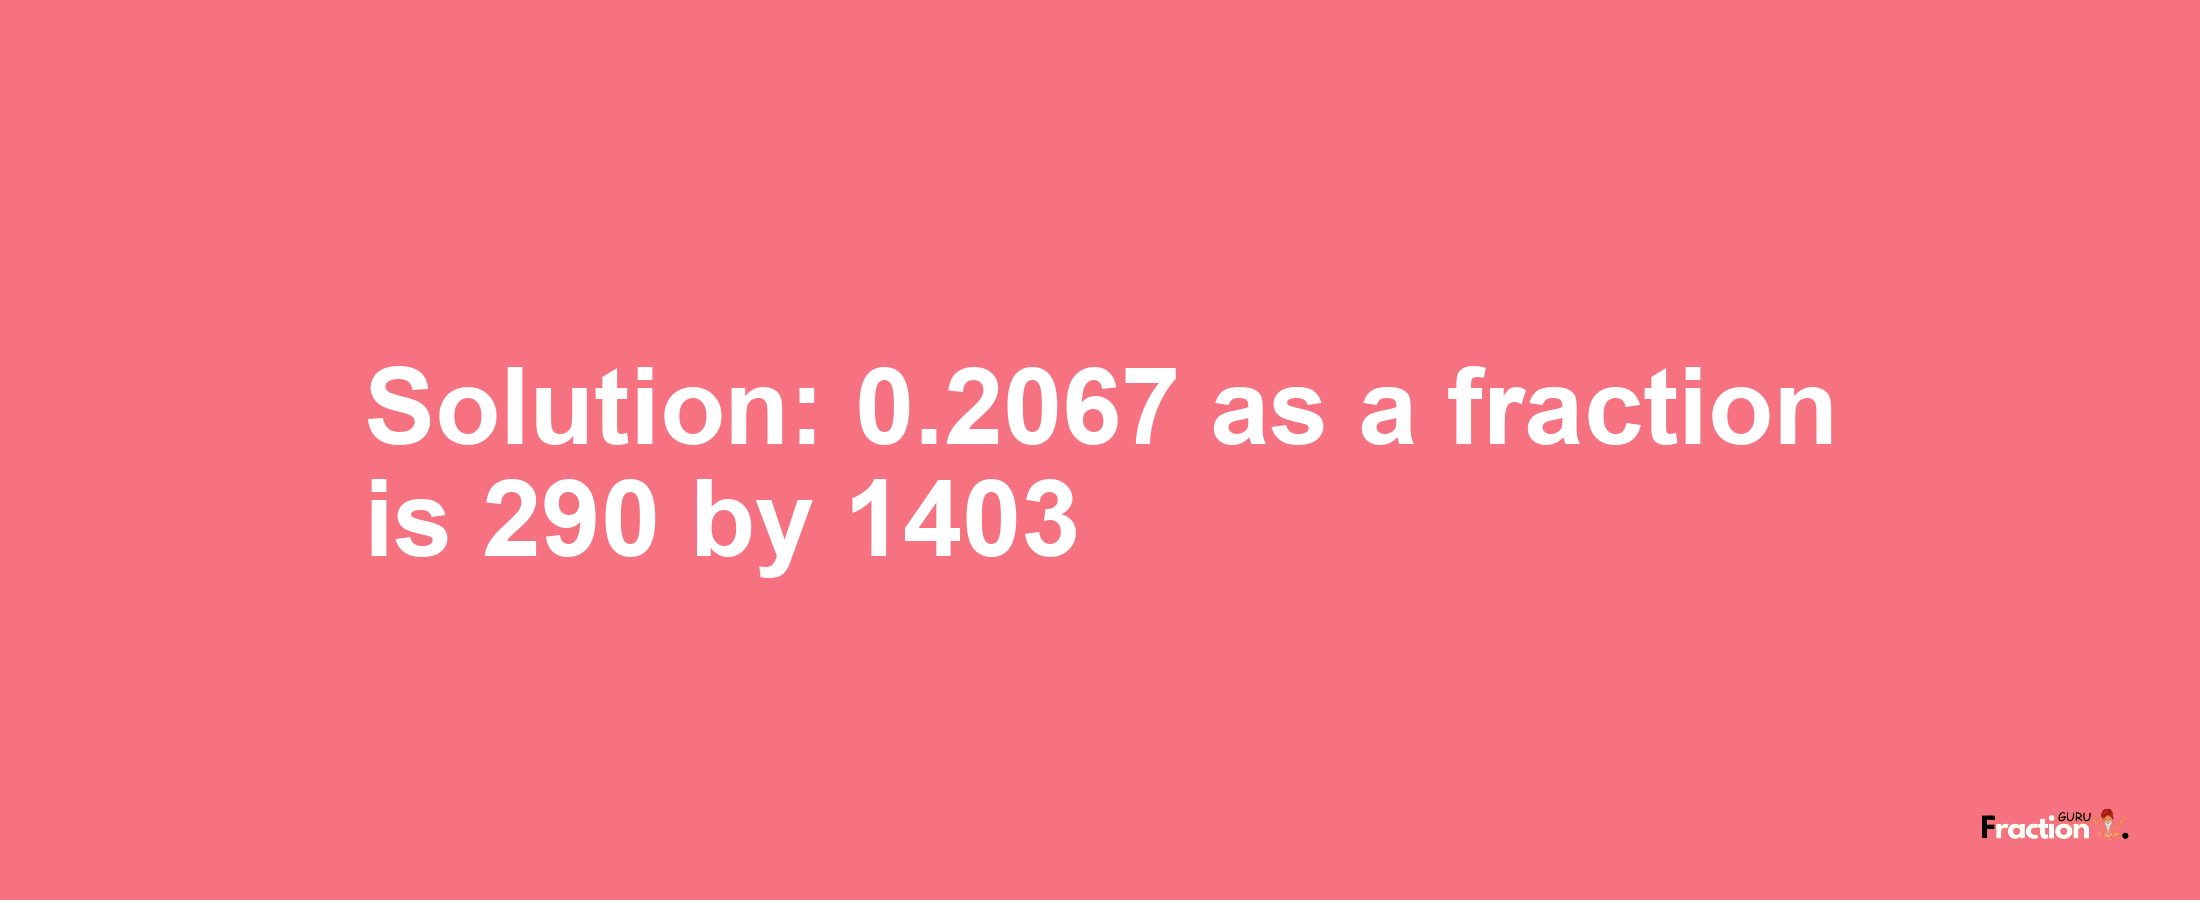 Solution:0.2067 as a fraction is 290/1403